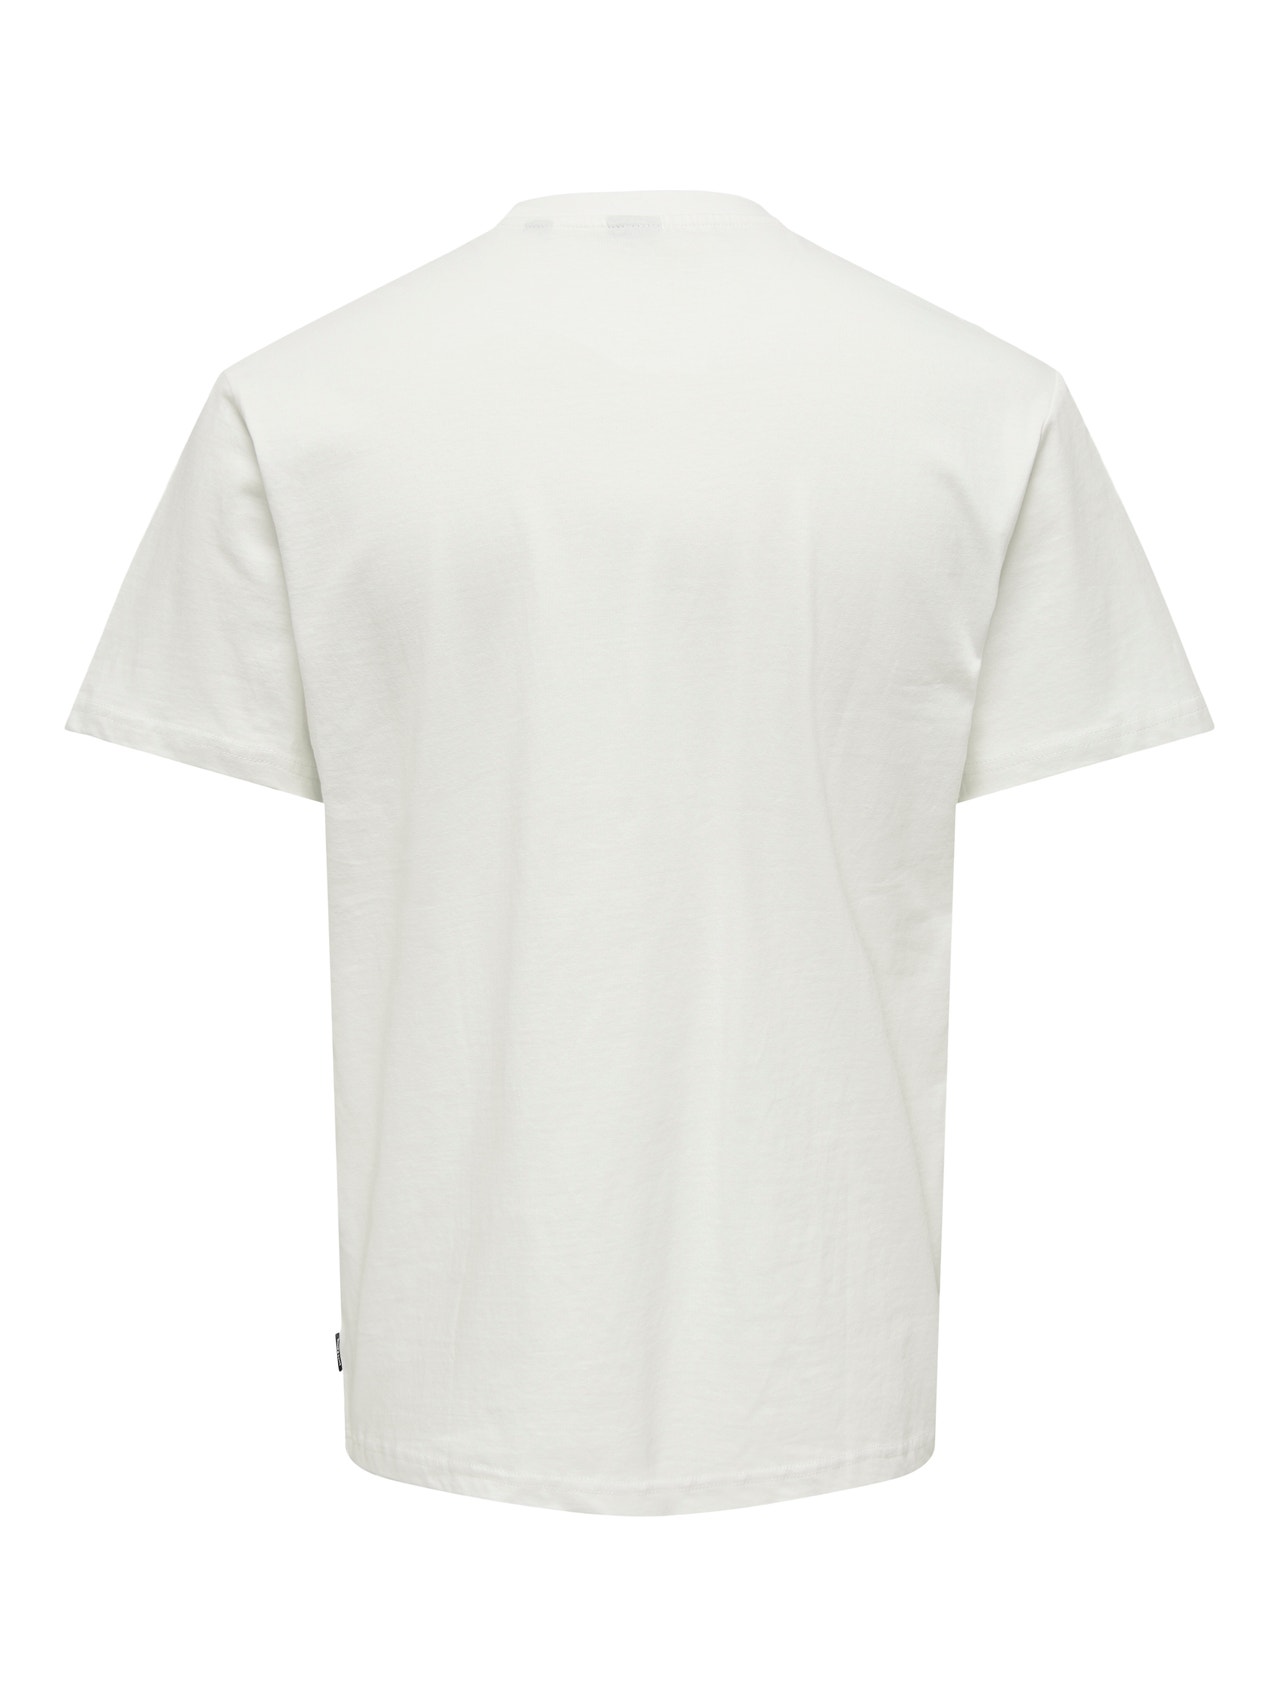 ONLY & SONS O-neck t-shirt with chest pocket -Cloud Dancer - 22024803